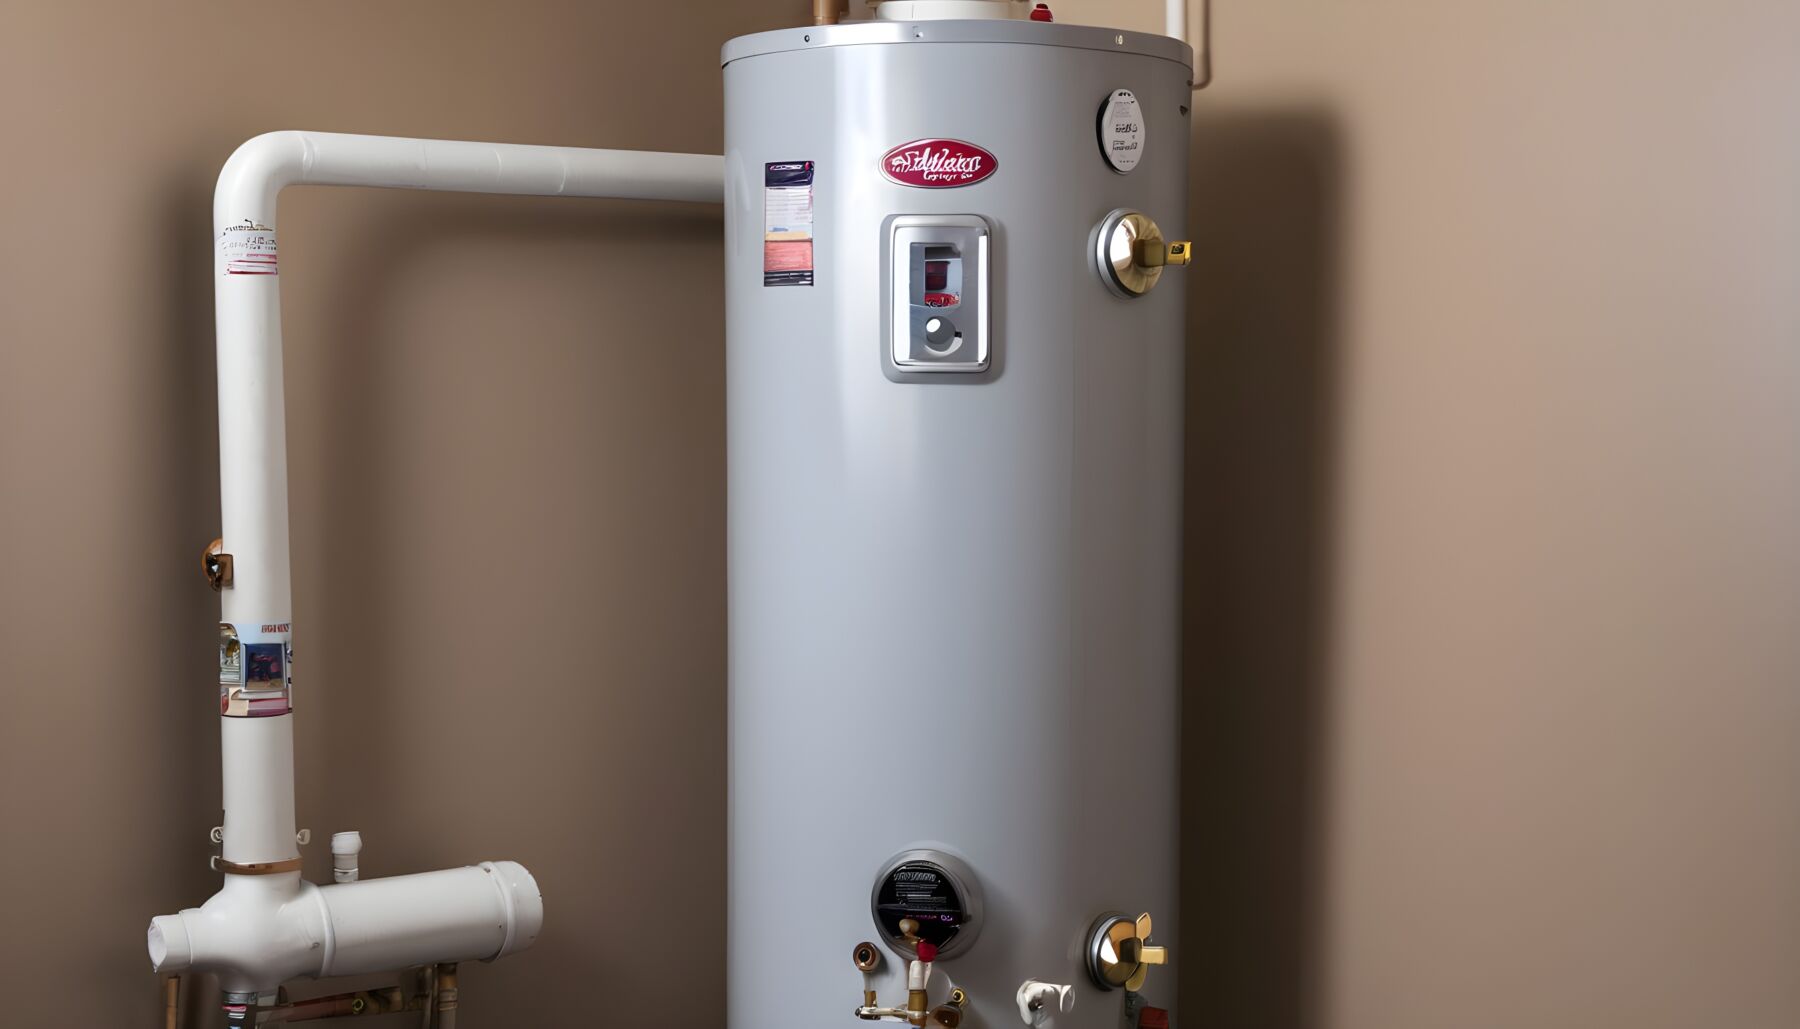 Modern Water Heater In A Home Upscaled 